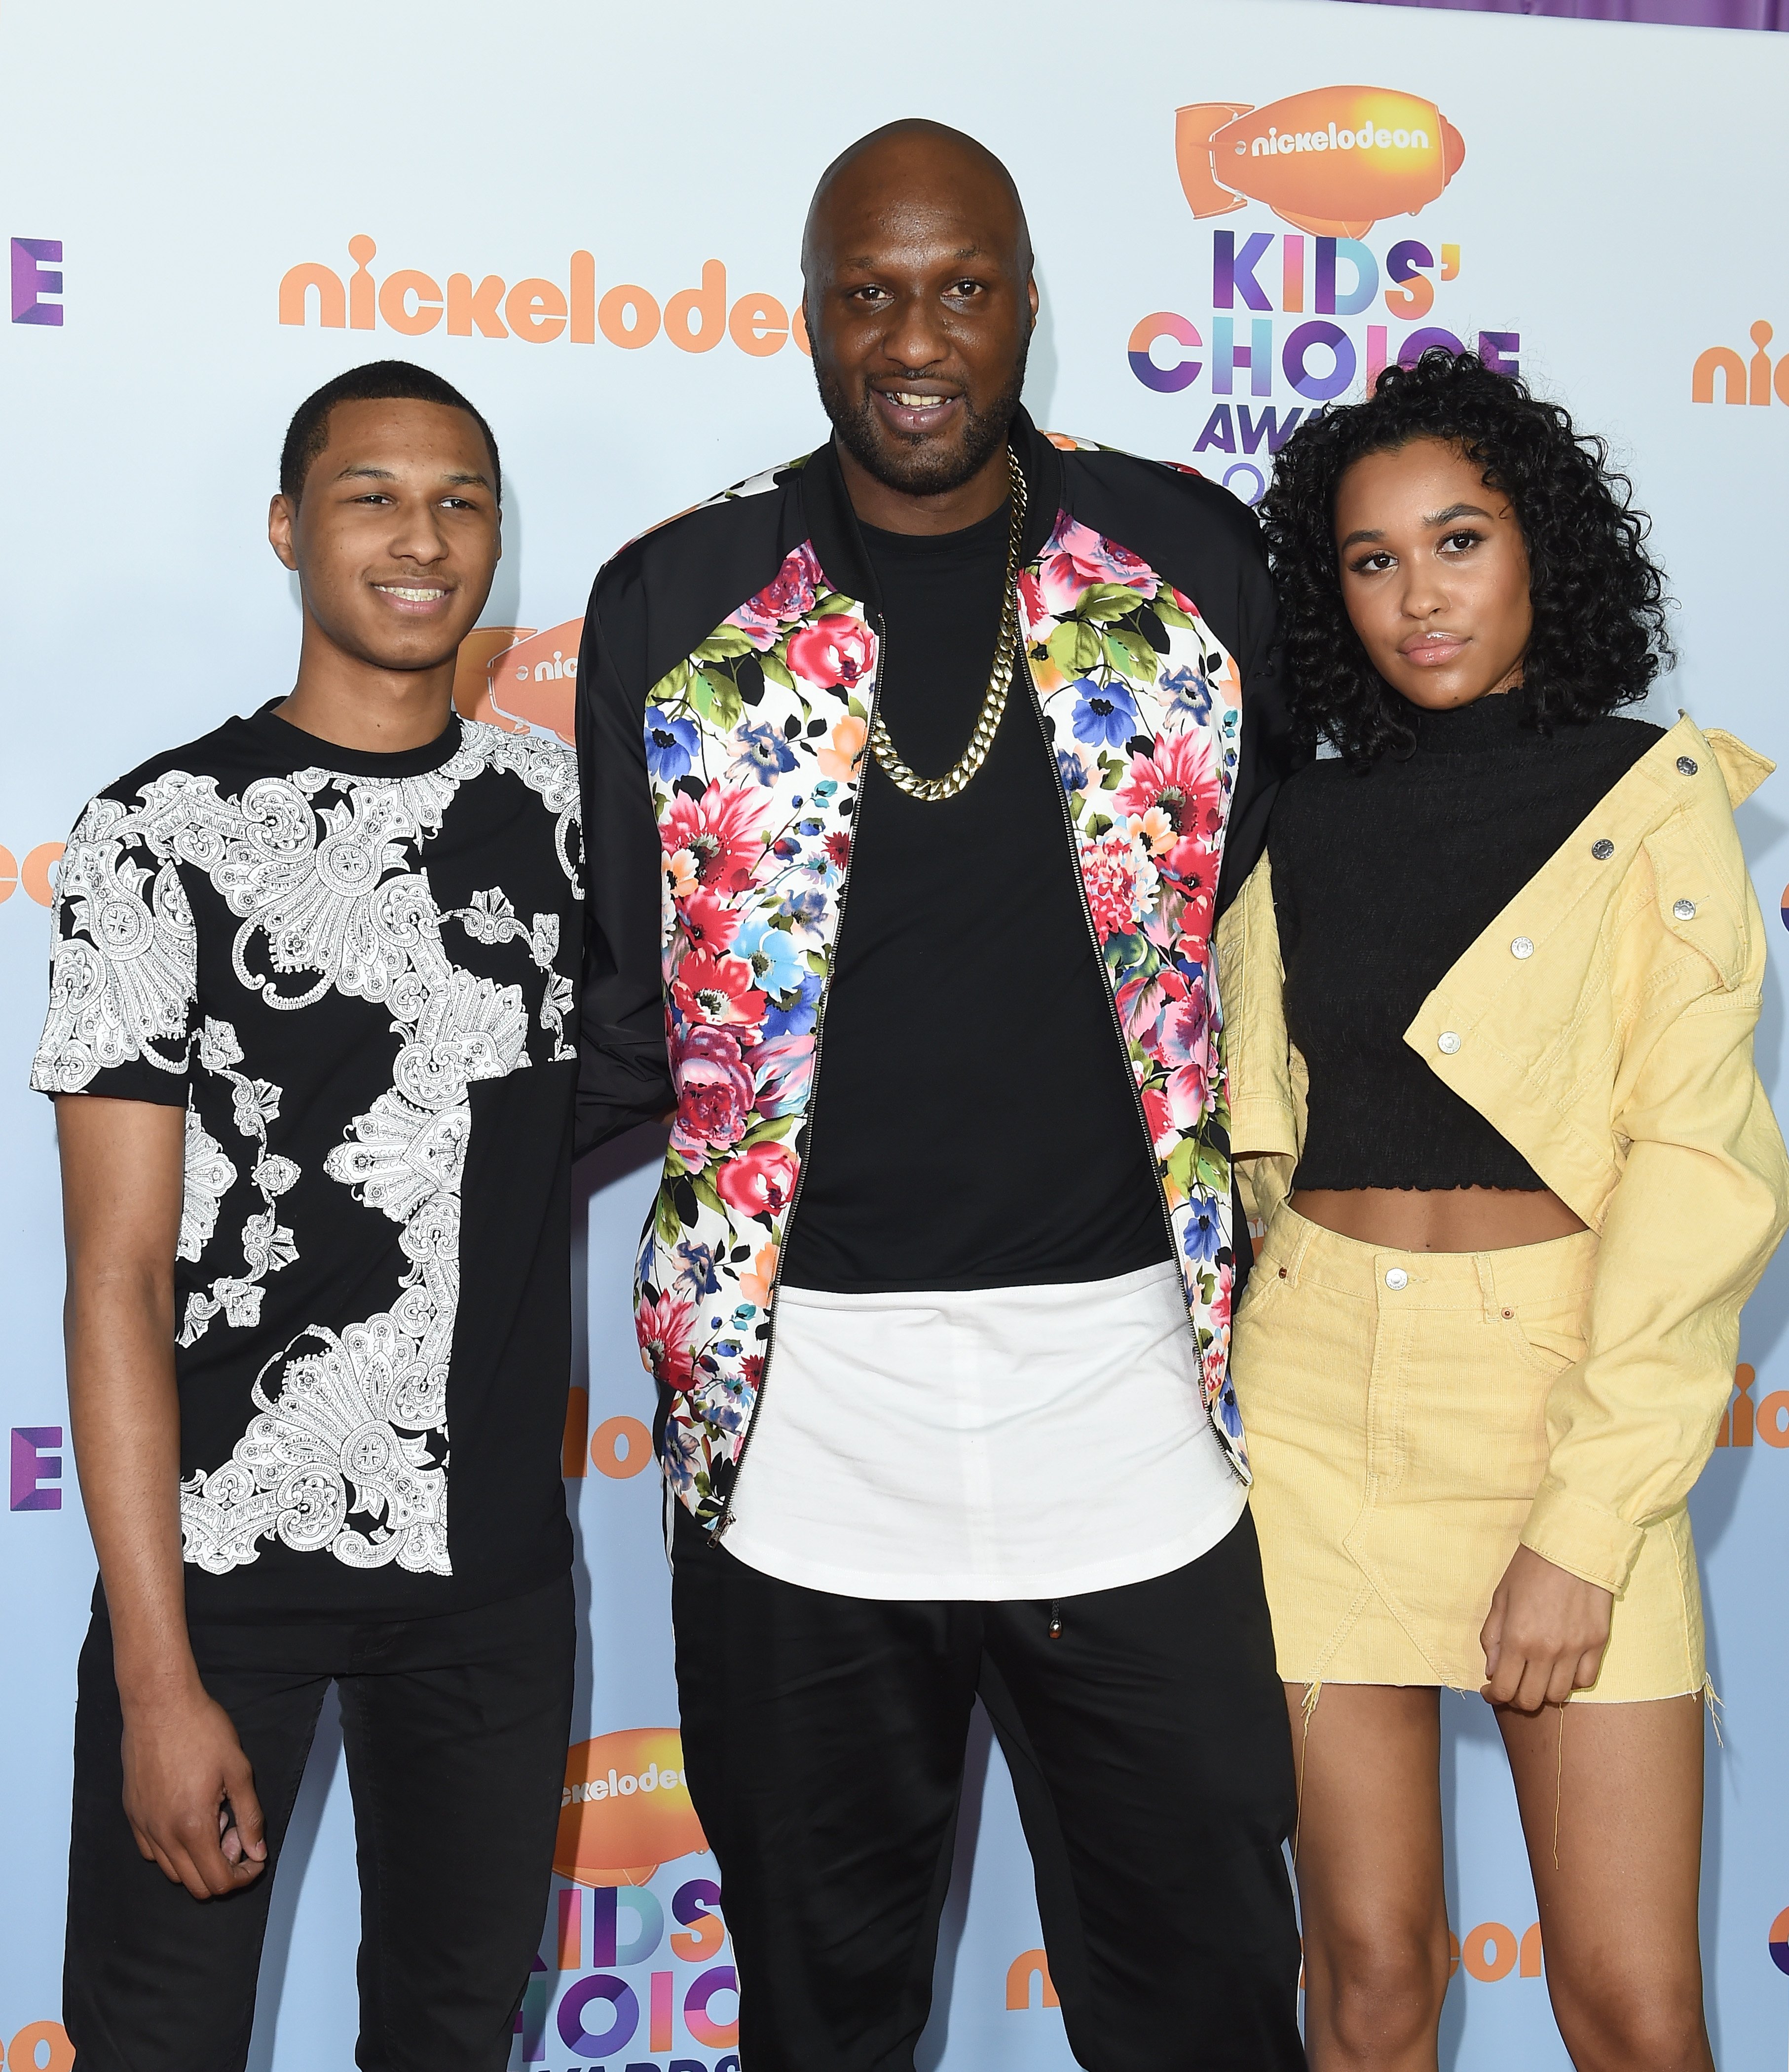 Basketball player Lamar Odom (C), son Lamar Odom Jr and daughter Destiny Odom arrive at Nickelodeon's 2017 Kids' Choice Awards at USC Galen Center on March 11, 2017 in Los Angeles, California. | Photo: Getty Images